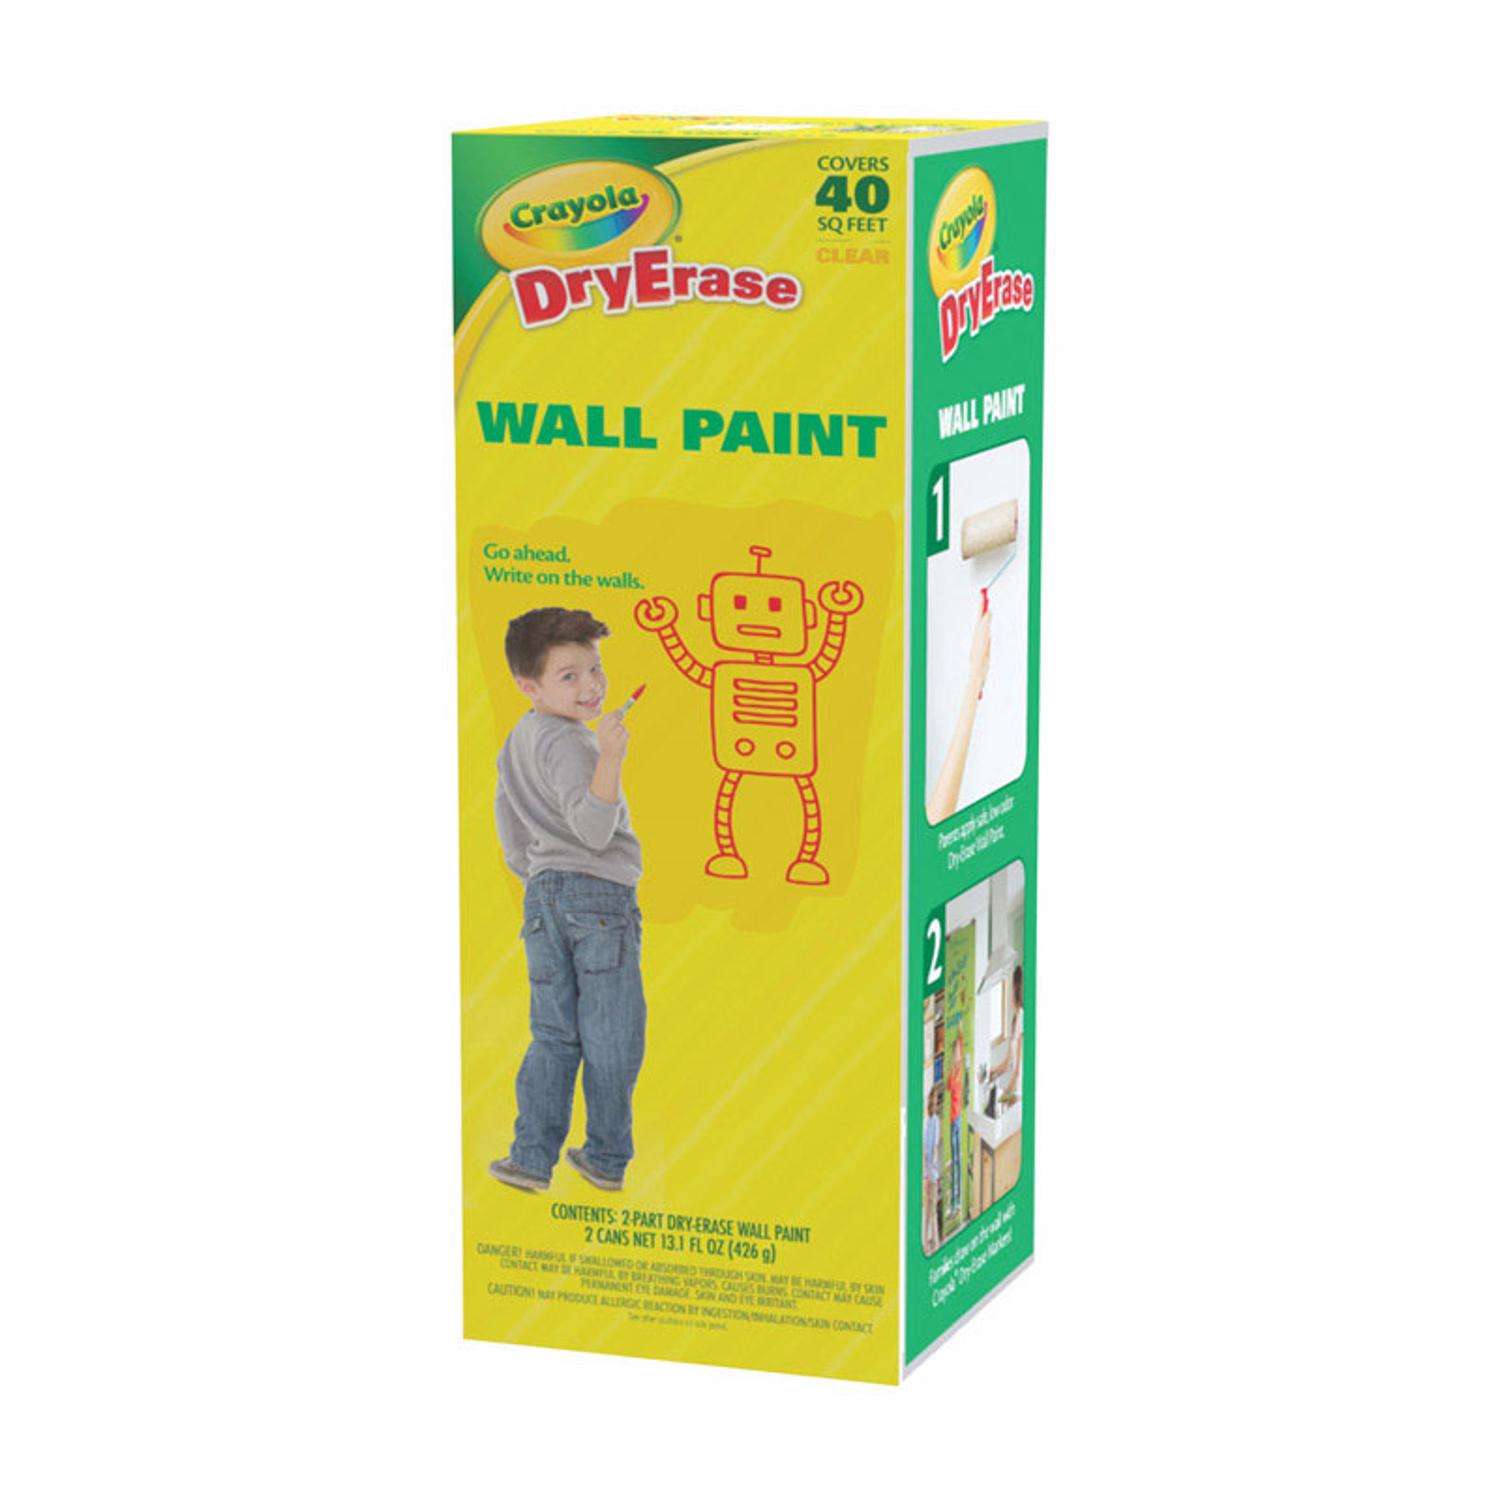 Feet Crayola Dry Erase Wall Paint Draw On The Wall Covers 40 SQ 